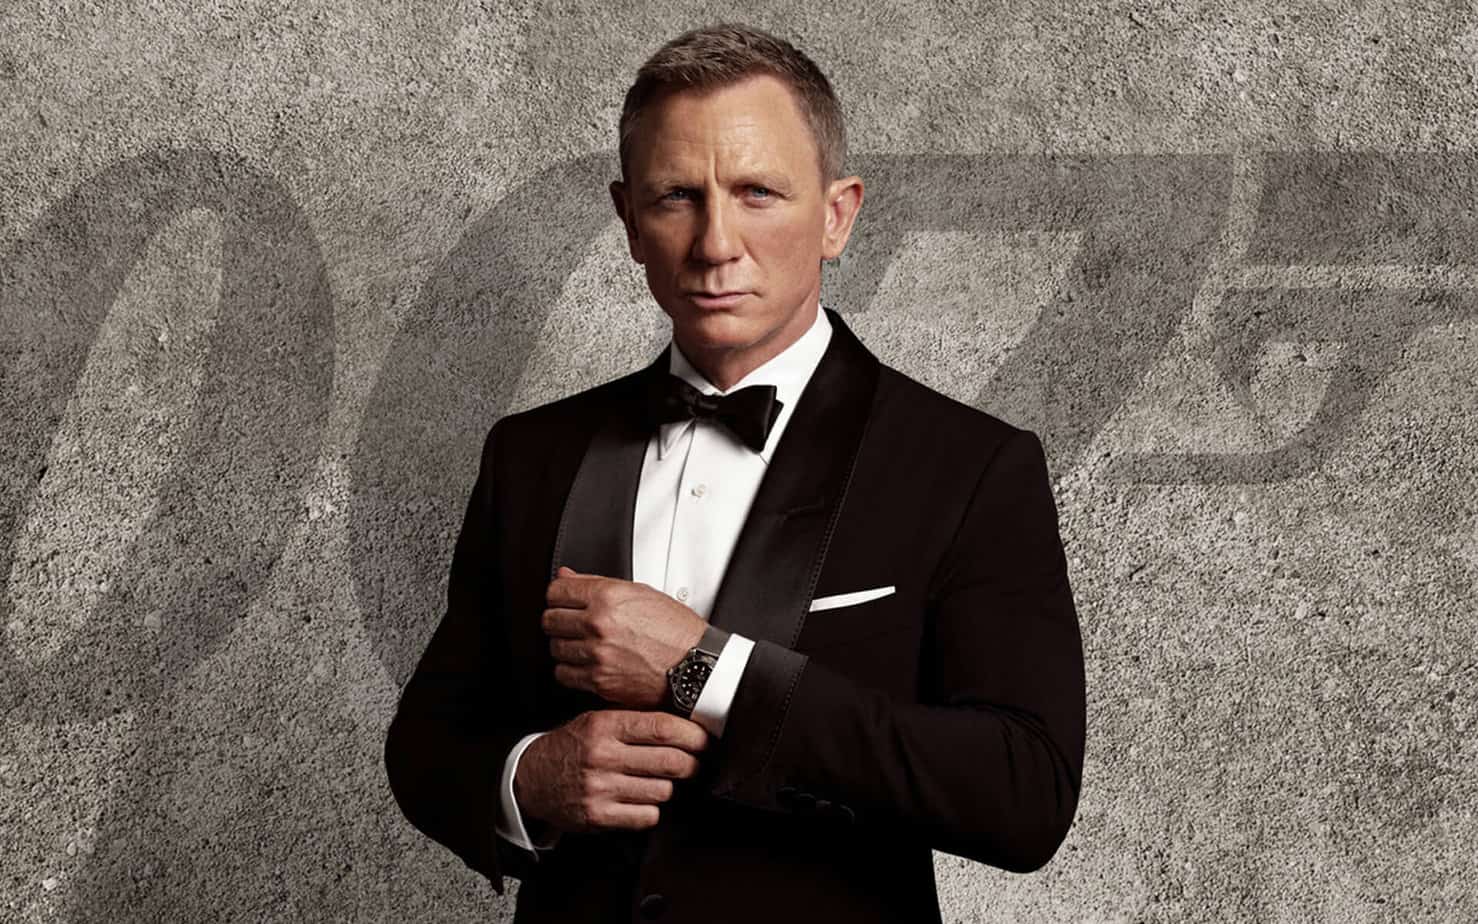 DANIEL CRAIG REALLY IS DONE - Actor opens up a bit more on his decision to play Bond